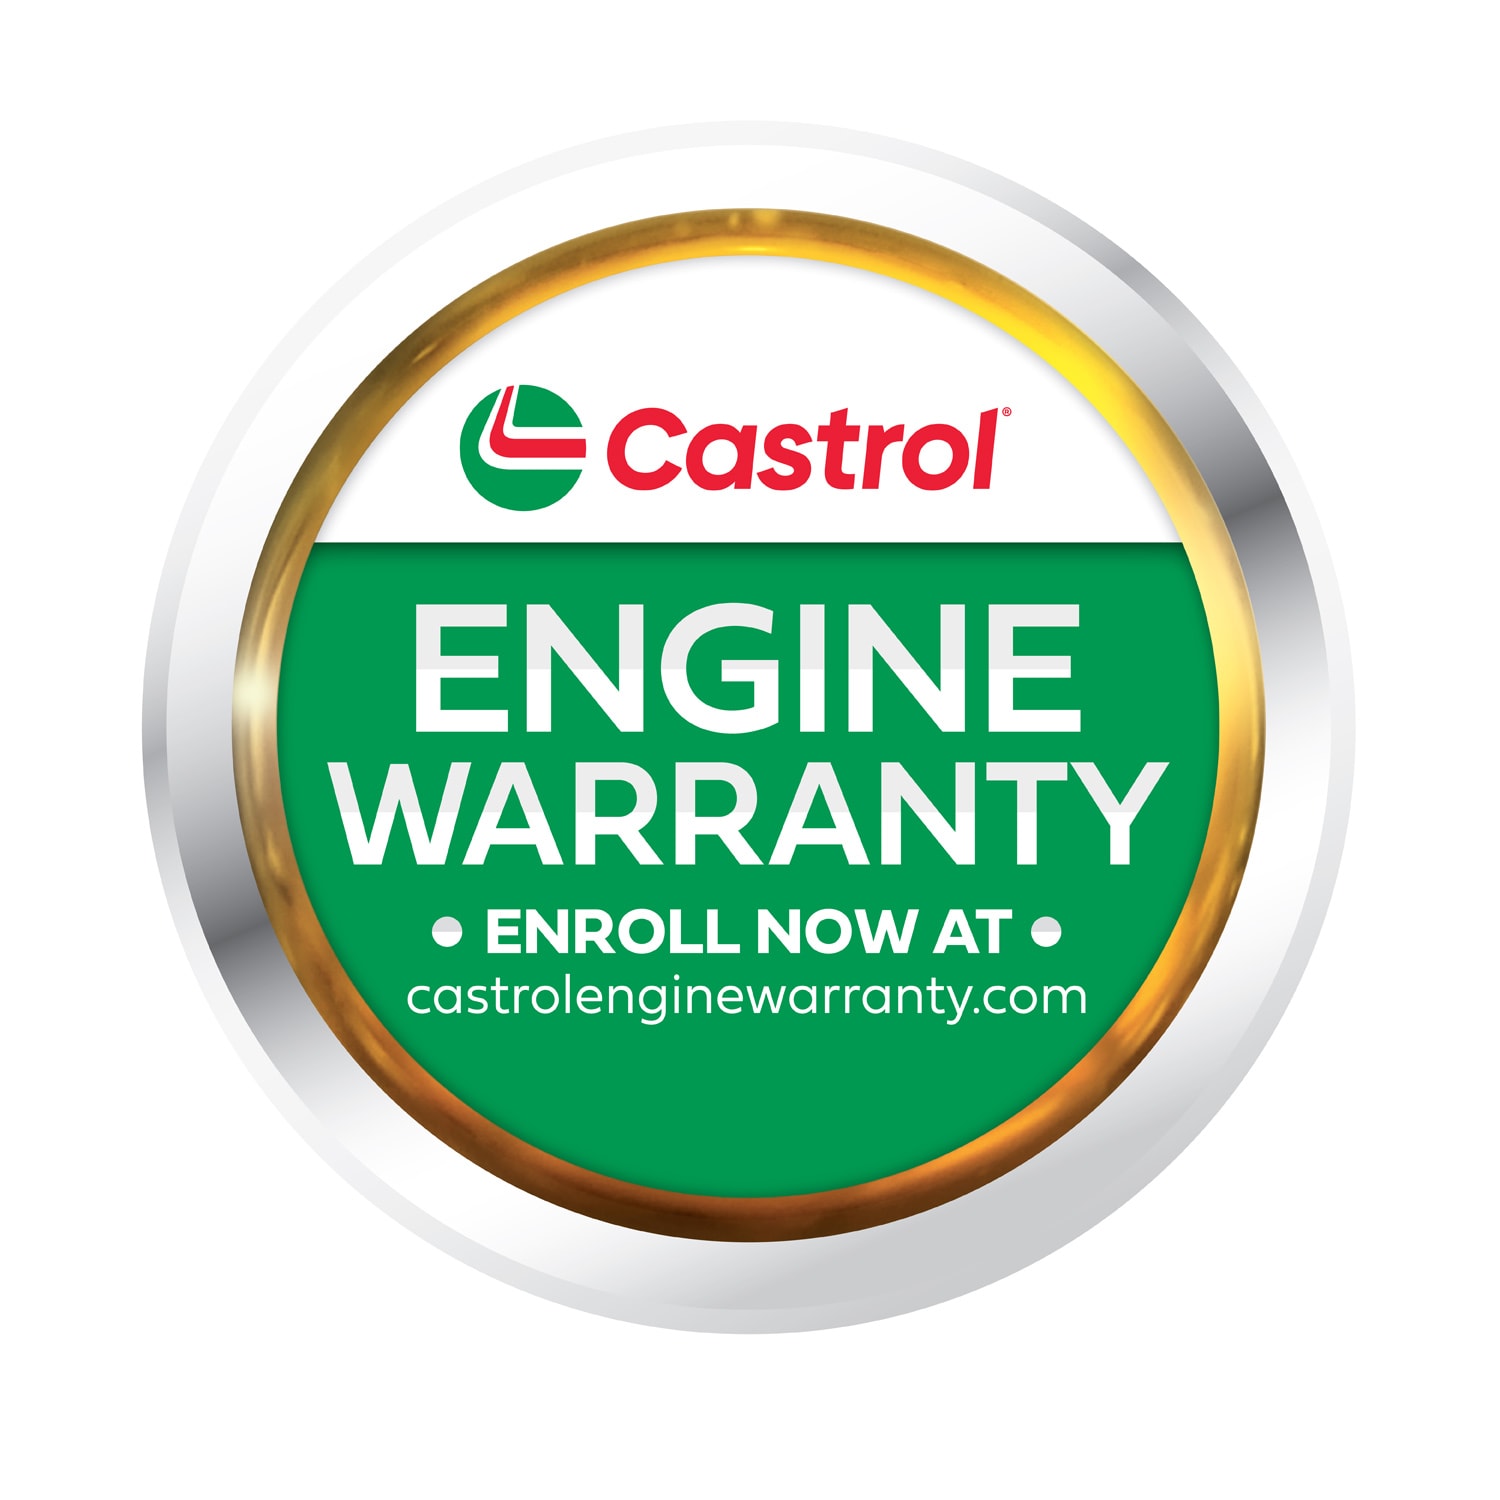 CASTROL 1 Quart 5W-20 Motor Oil for Maximum Engine Protection and  Performance in the Motor Oil u0026 Additives department at Lowes.com